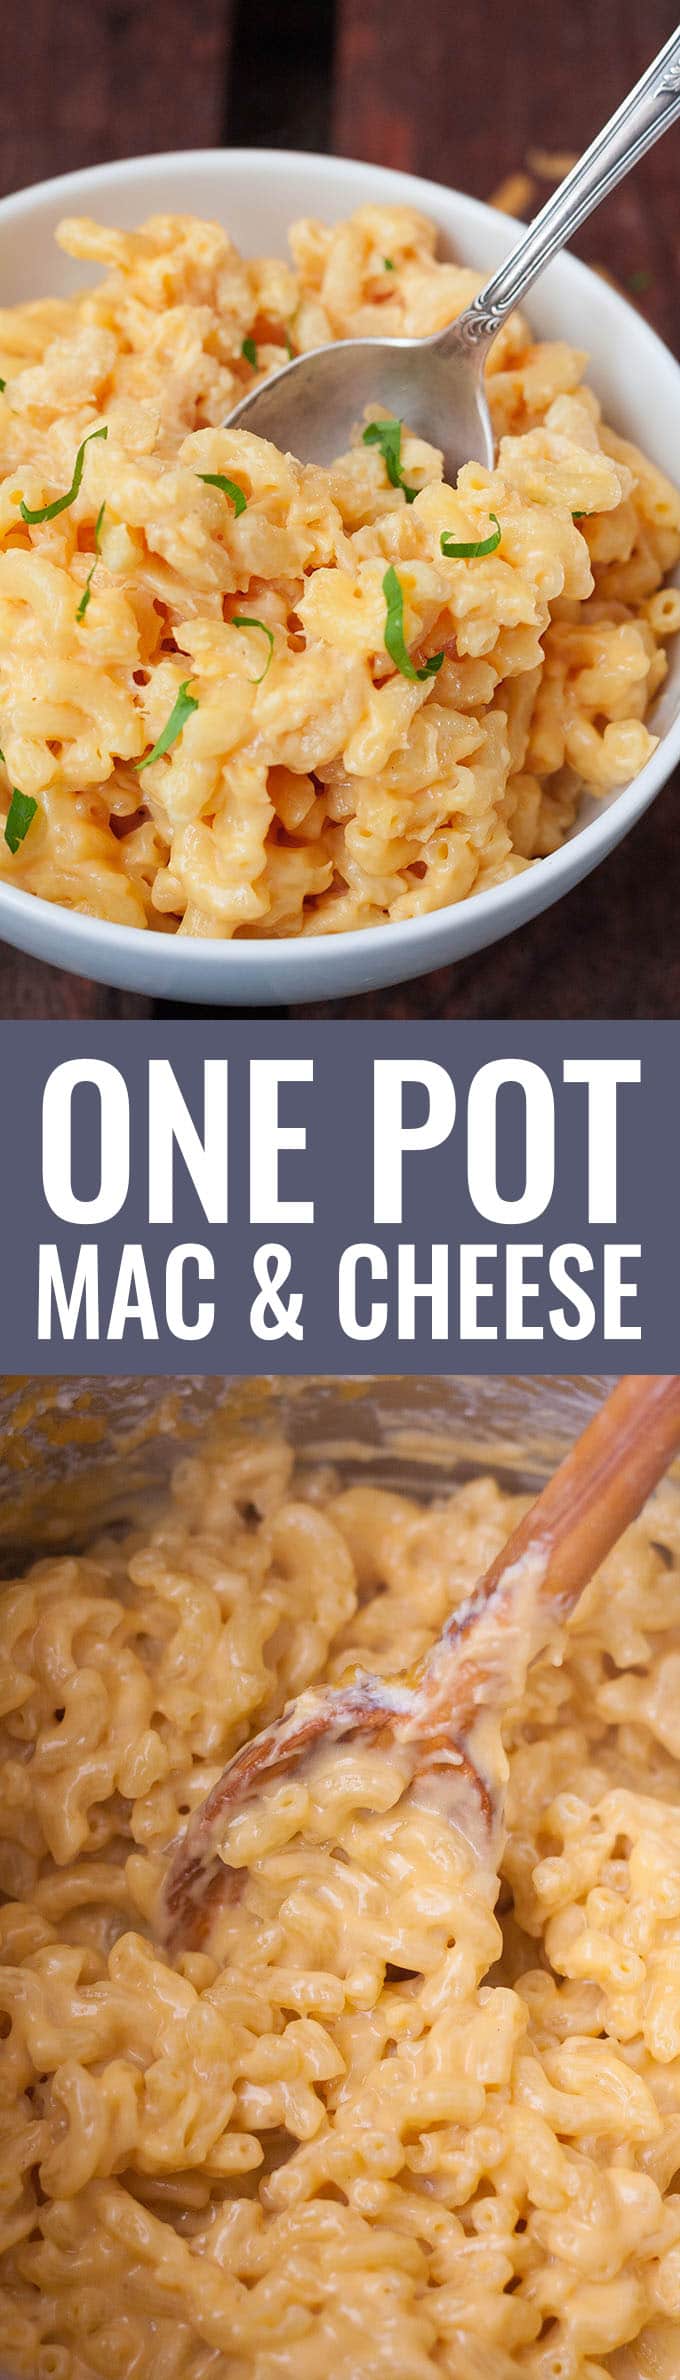 One Pot Mac and Cheese - Kochkarussell.com